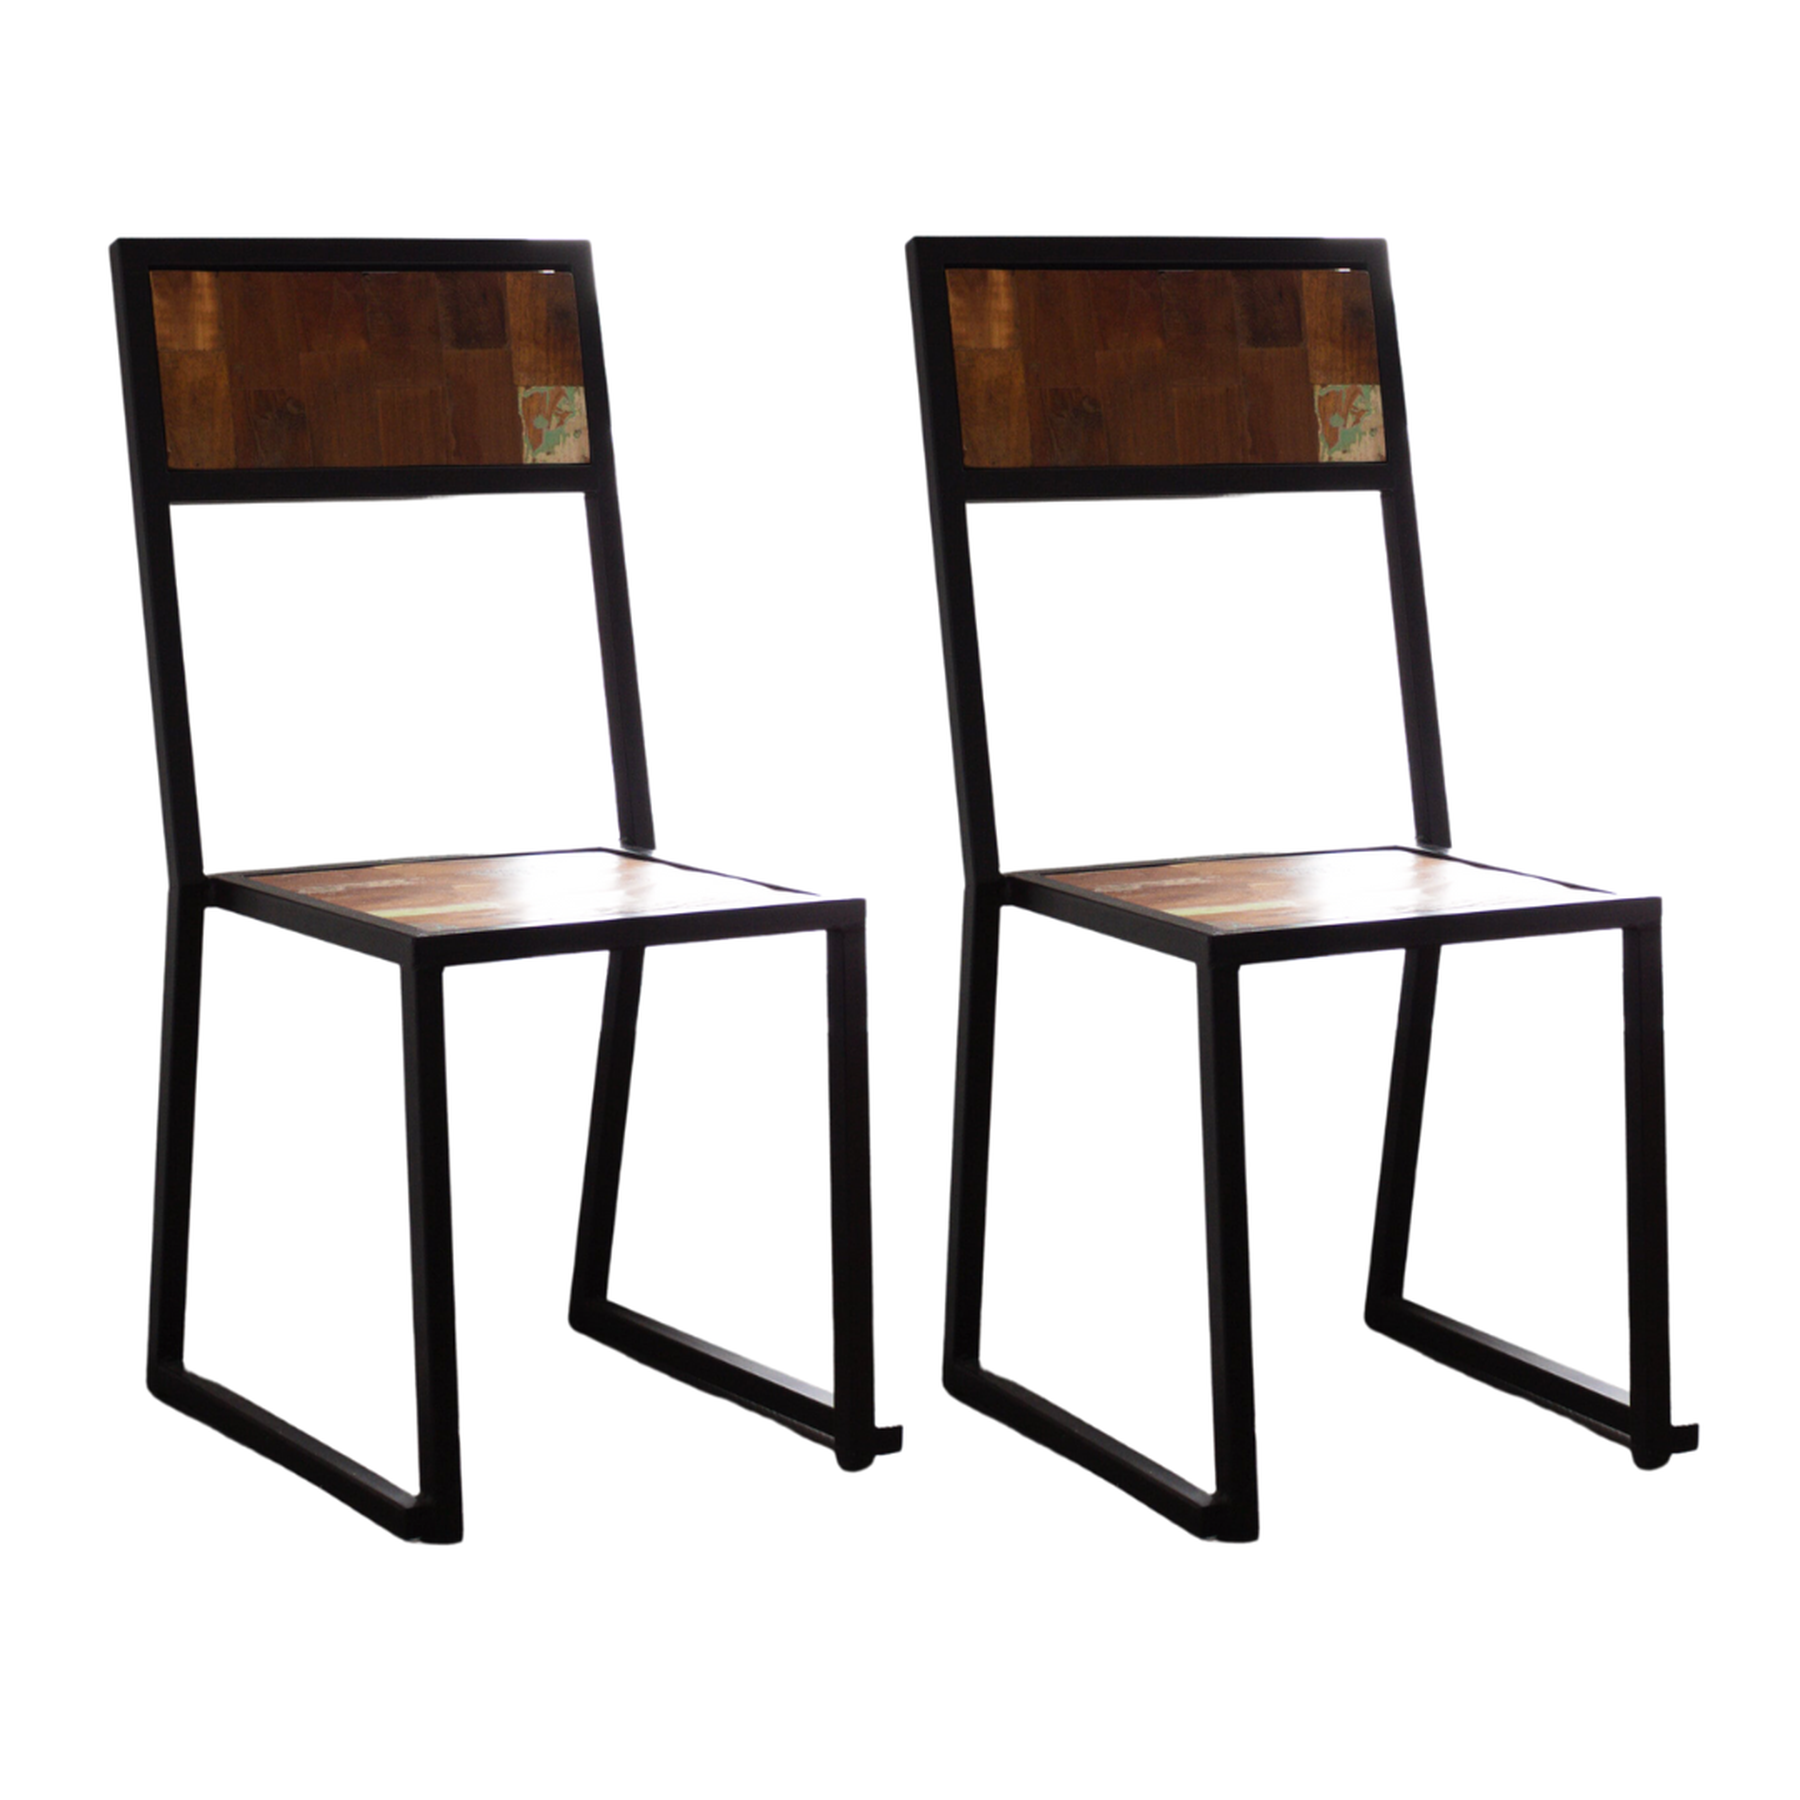 Rustic Dining Chair (Set of 2) | Modern Industrial Chairs | Chairs for Kitchen and Dining Room | 17.6x17.6x38.3 In